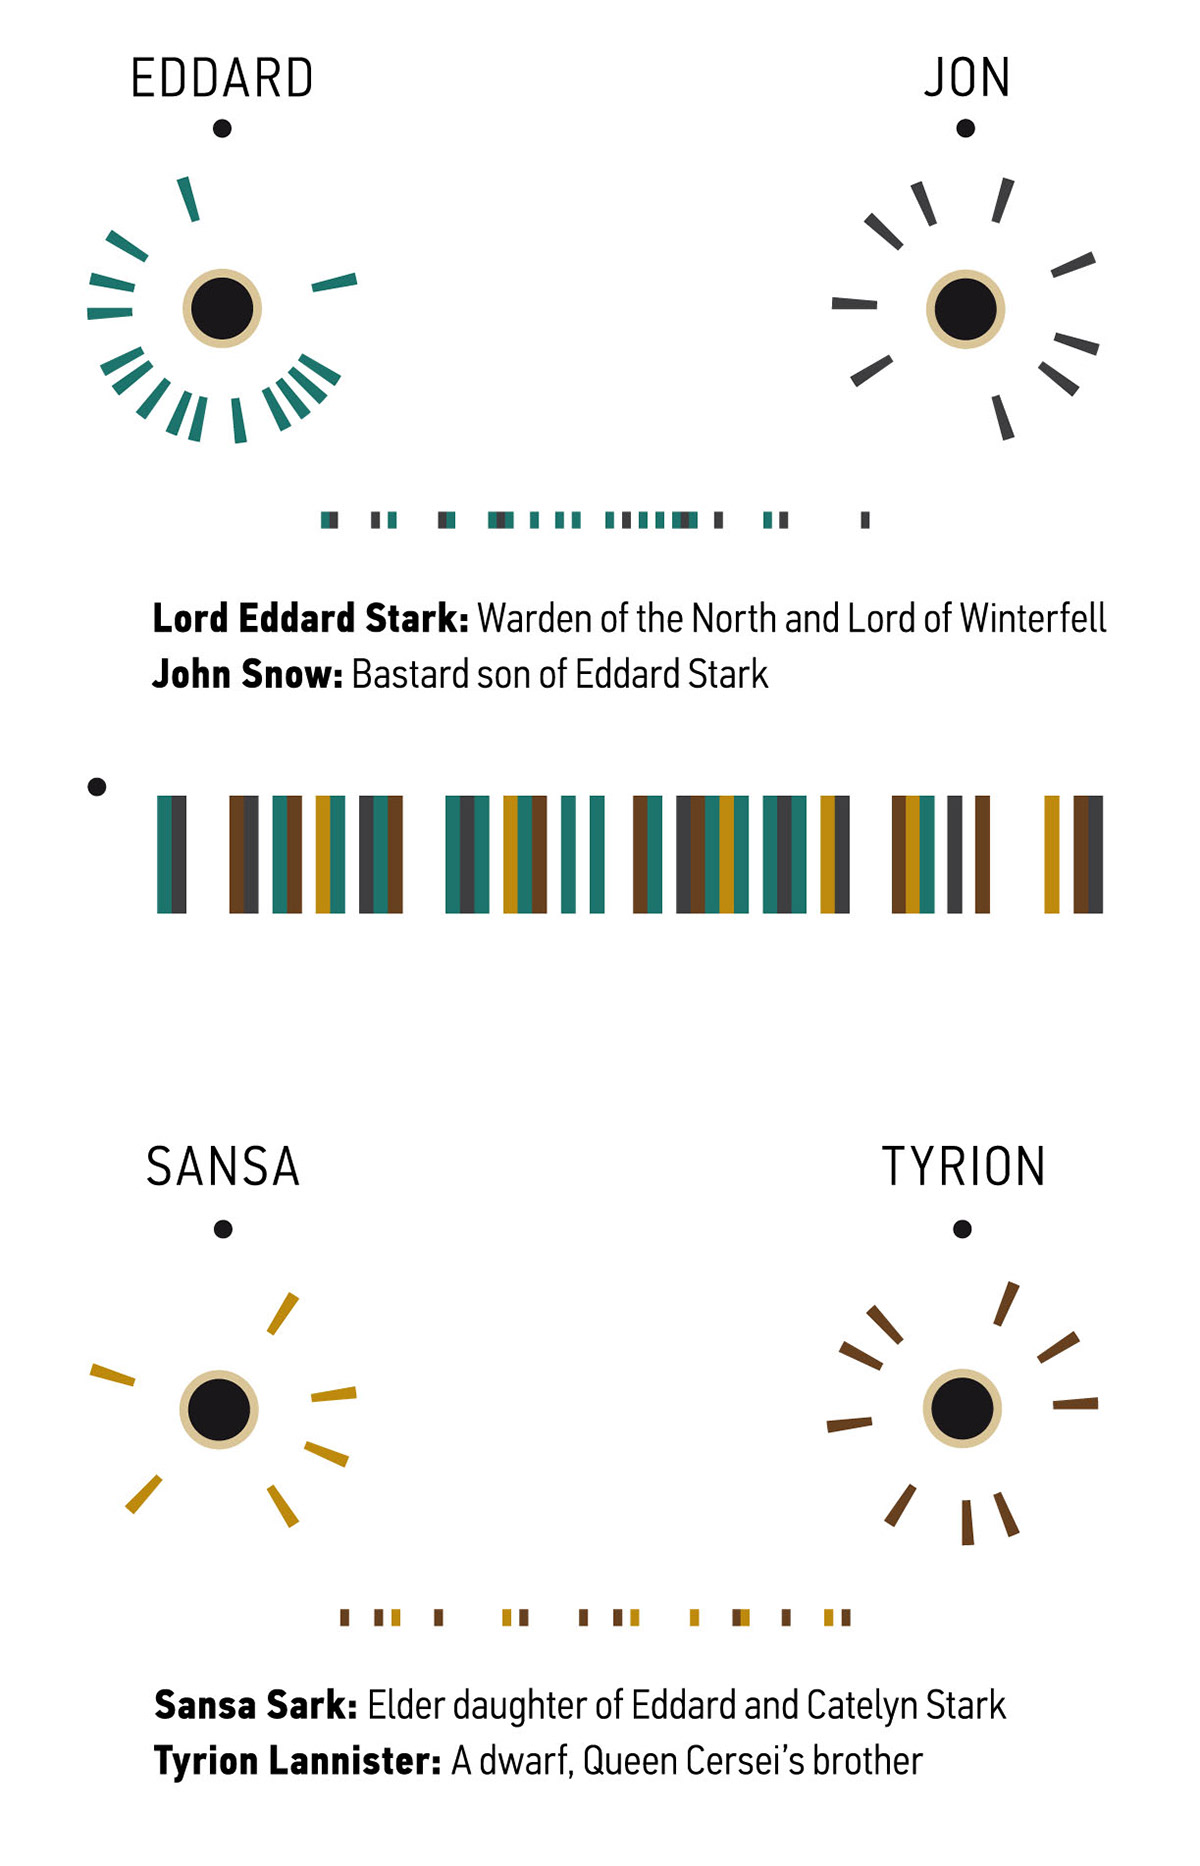 Poster Design vector Color Codes infographic poster George RR Martin Game of Thrones ice and fire Westeros fantasy epic novels solar system Planet System Orbit Author